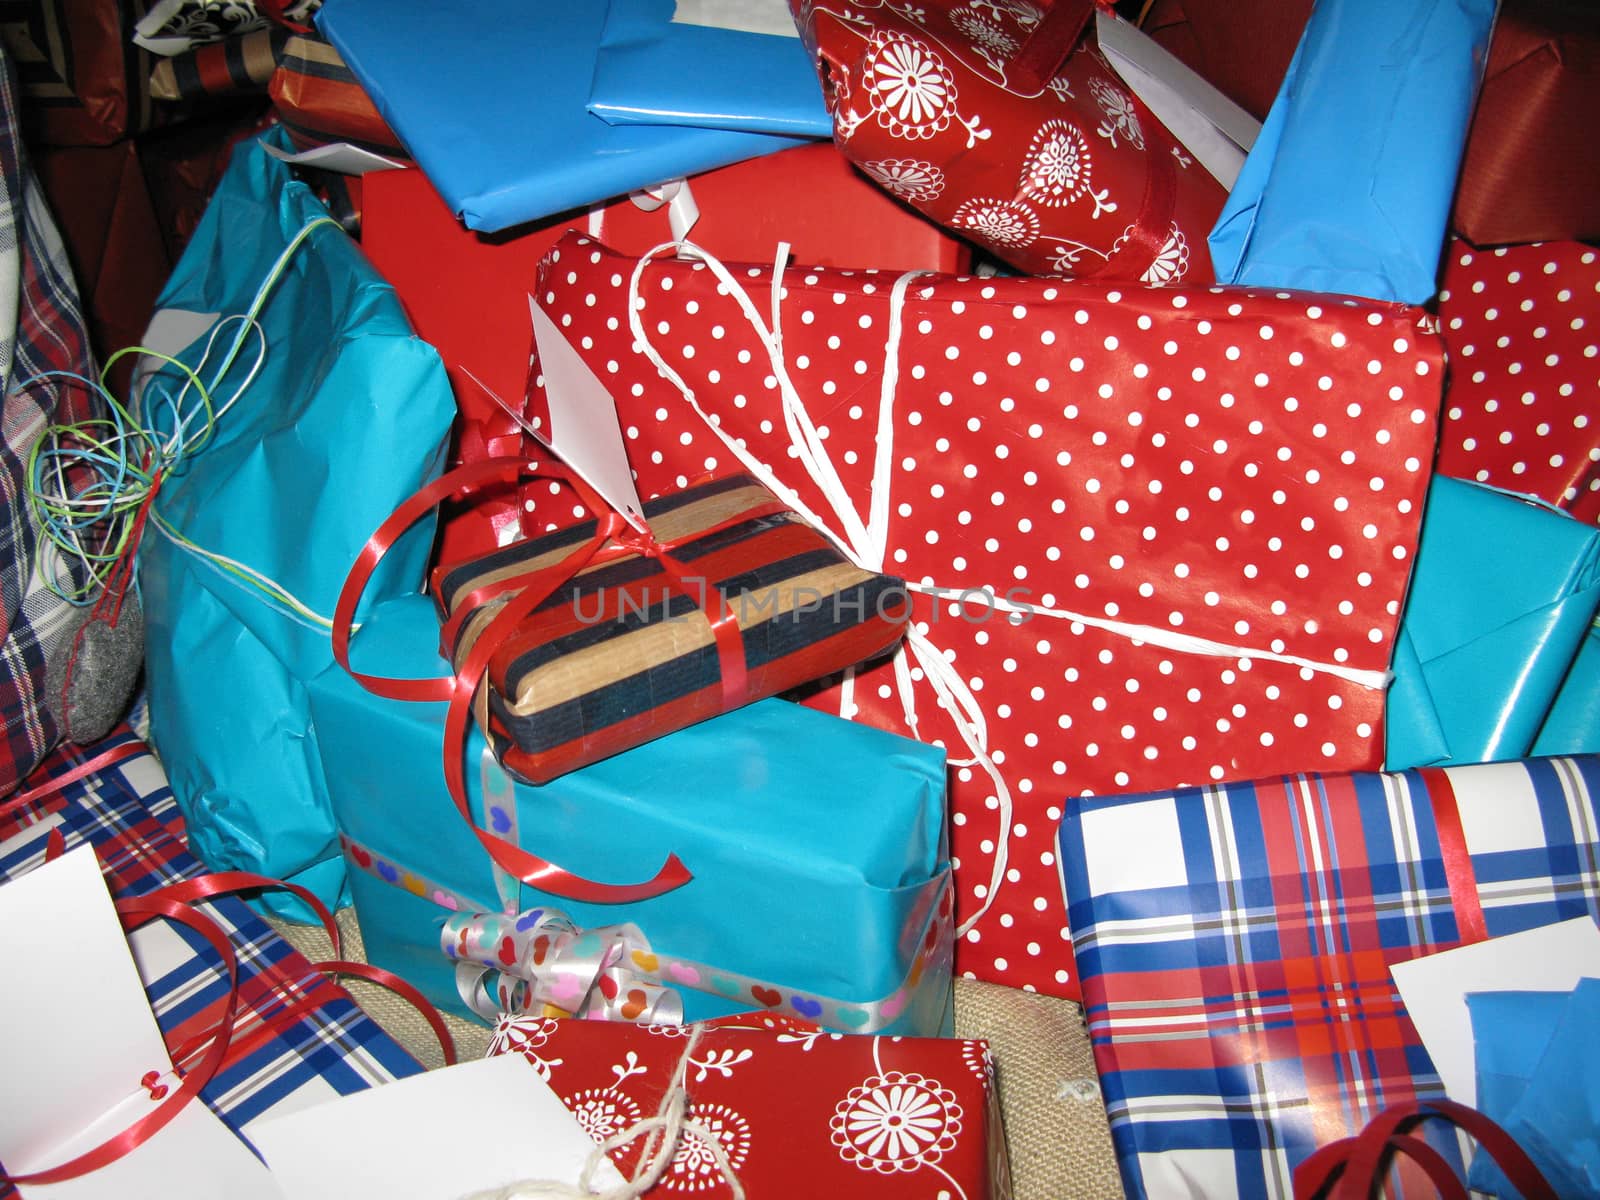 Wrapped christmas gifts with paper patterns, decors in red, white and blue.